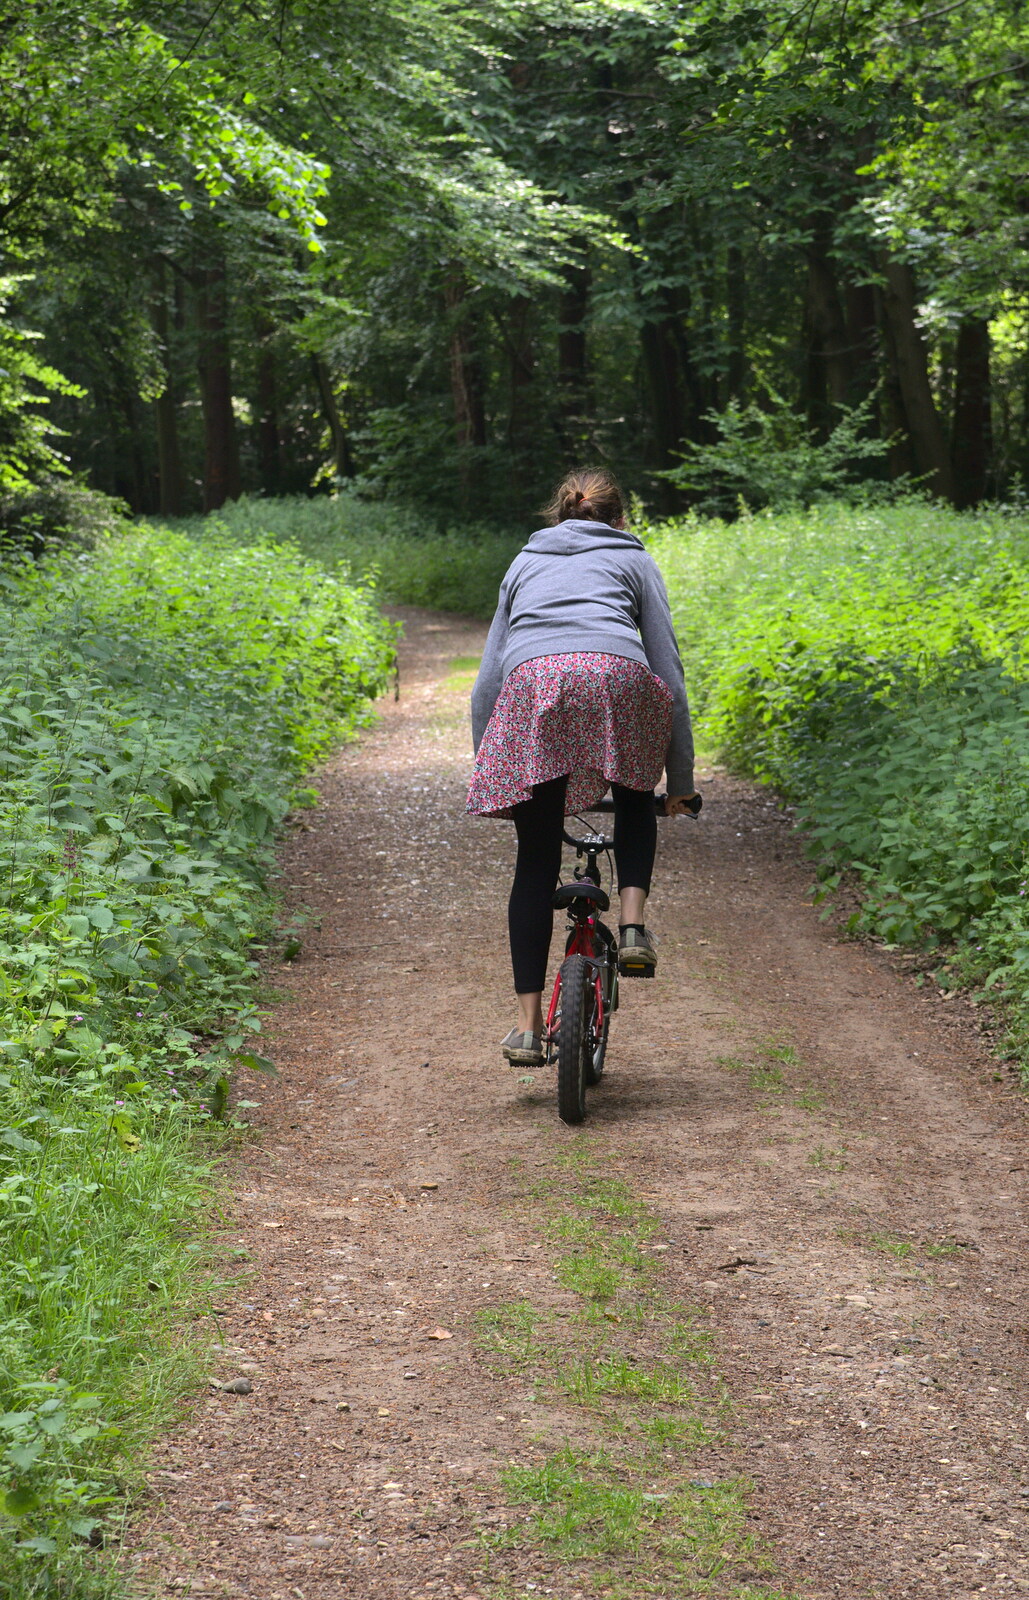 Isobel heads off on Fred's bike from A Weekend in the Camper Van, West Harling, Norfolk - 21st June 2014